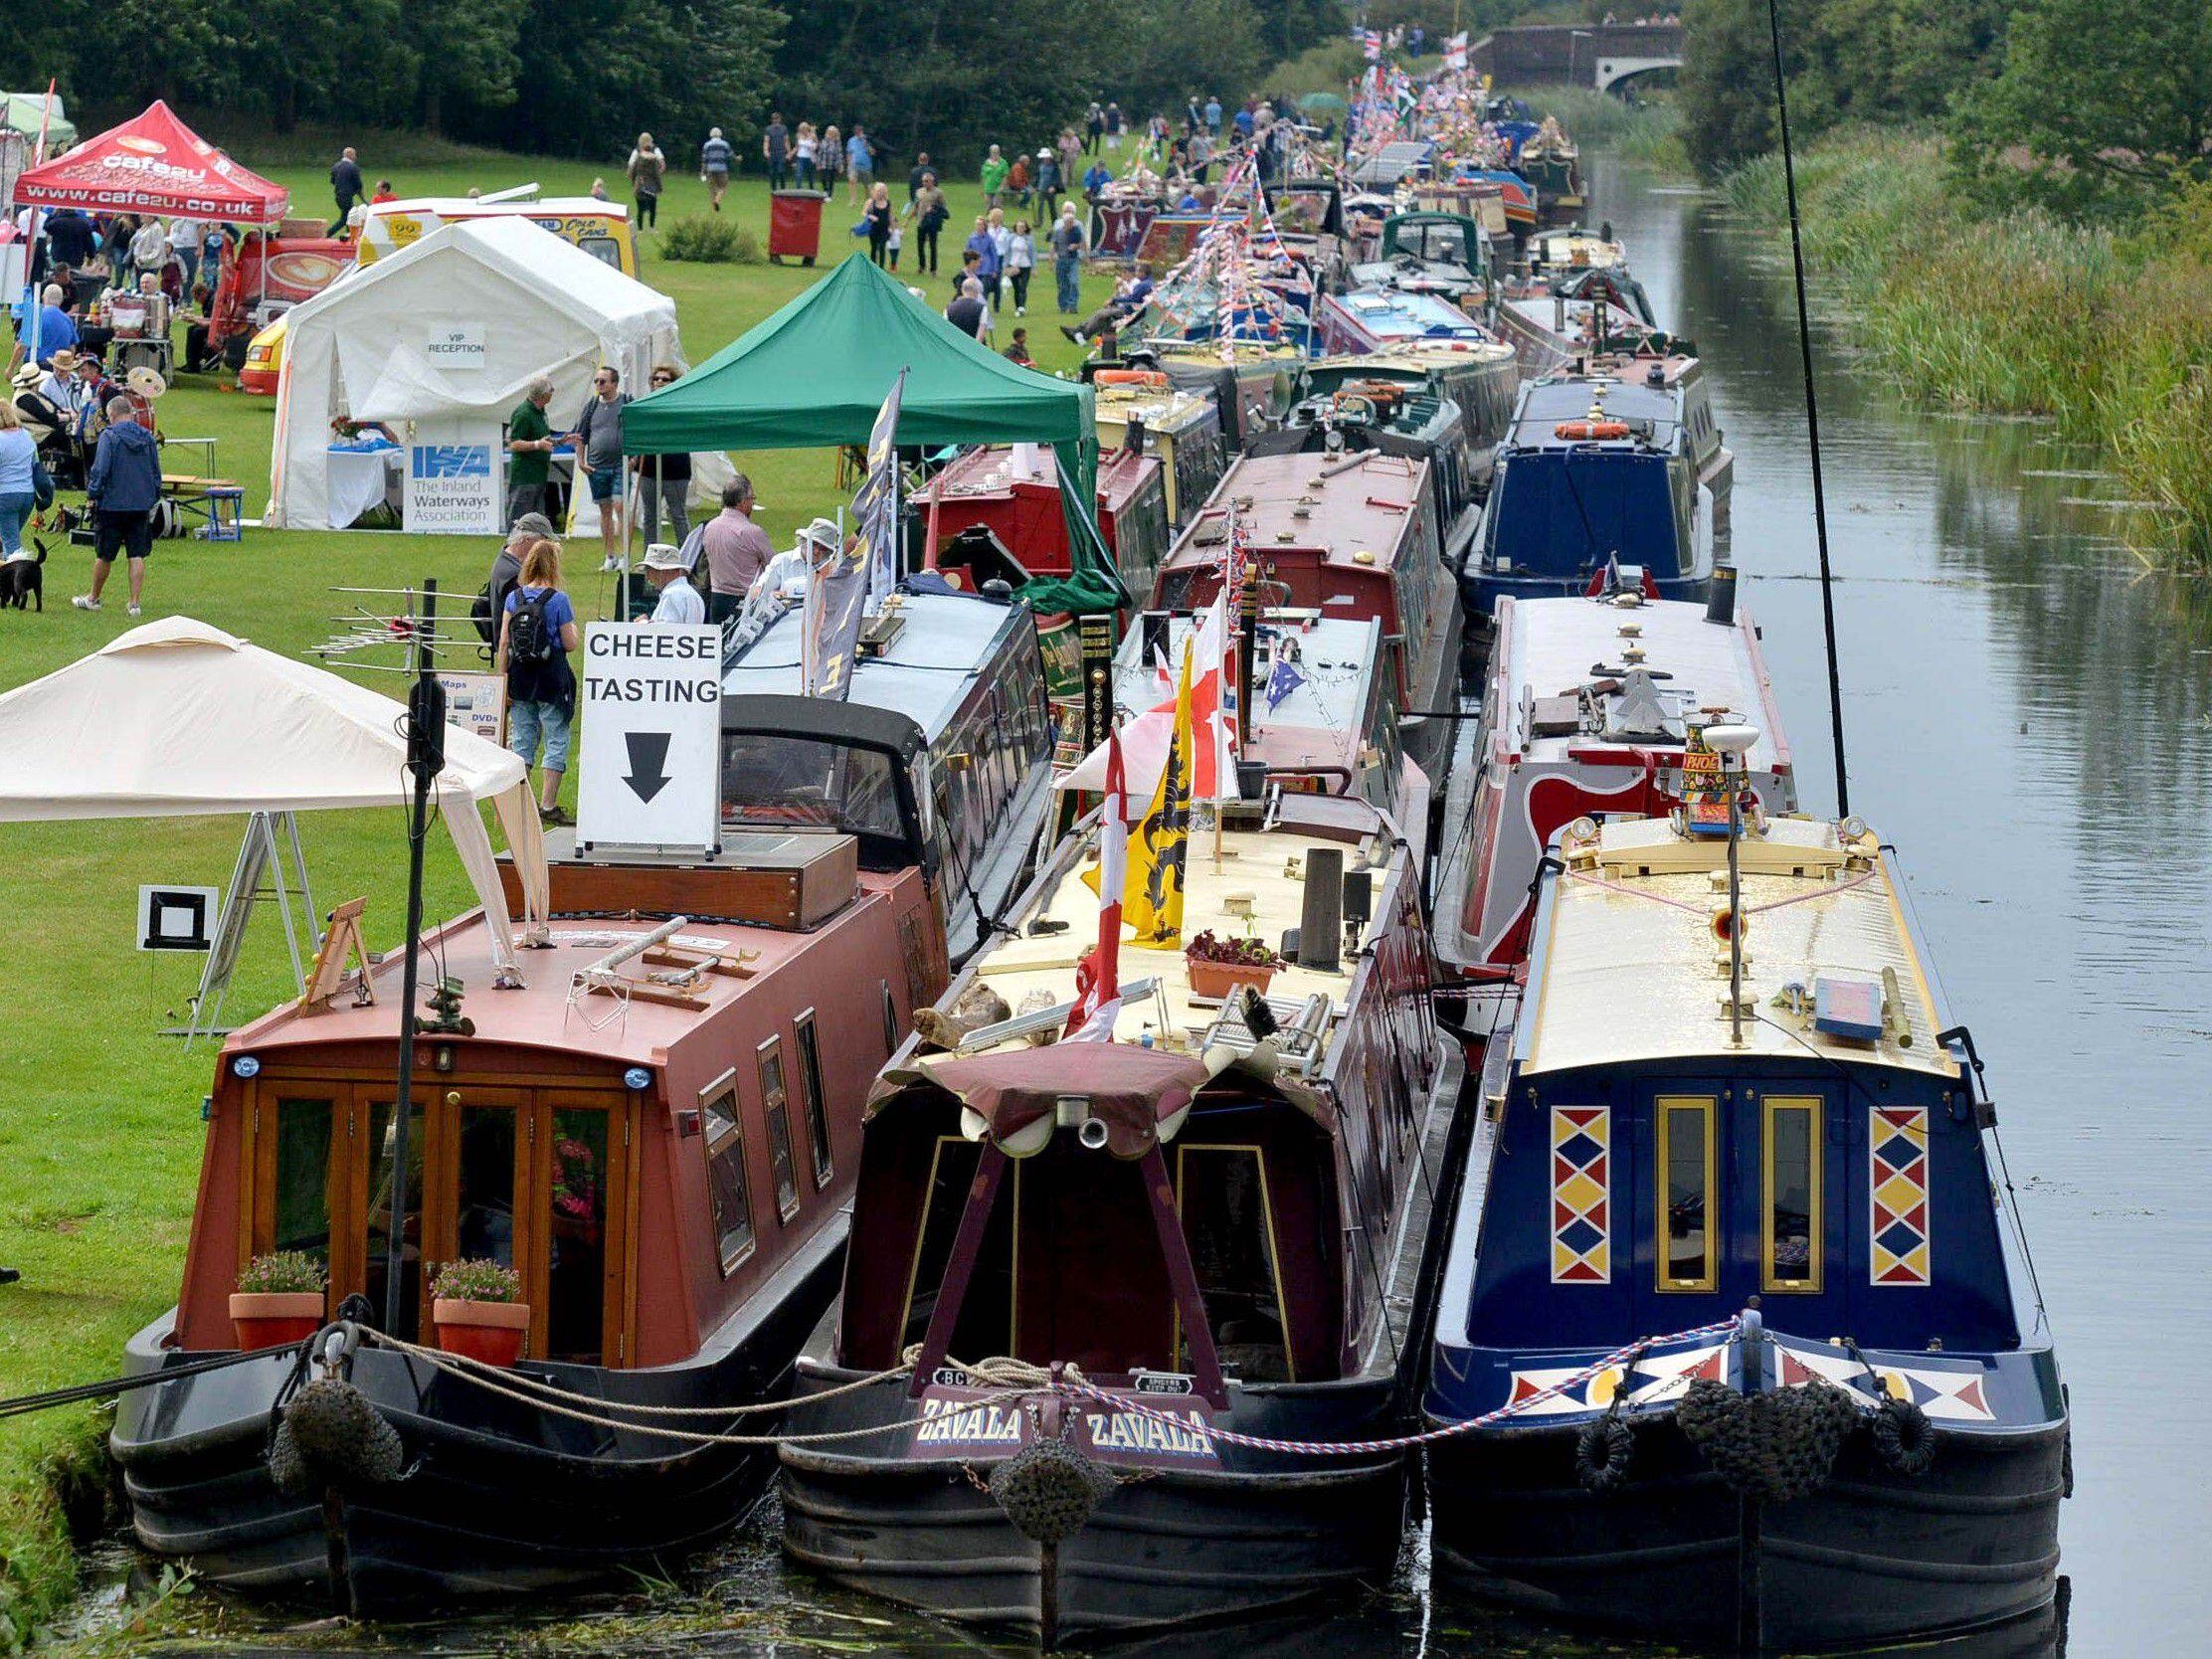 Plenty of marvellous narrowboats, music and fun at Festival of Water canal show